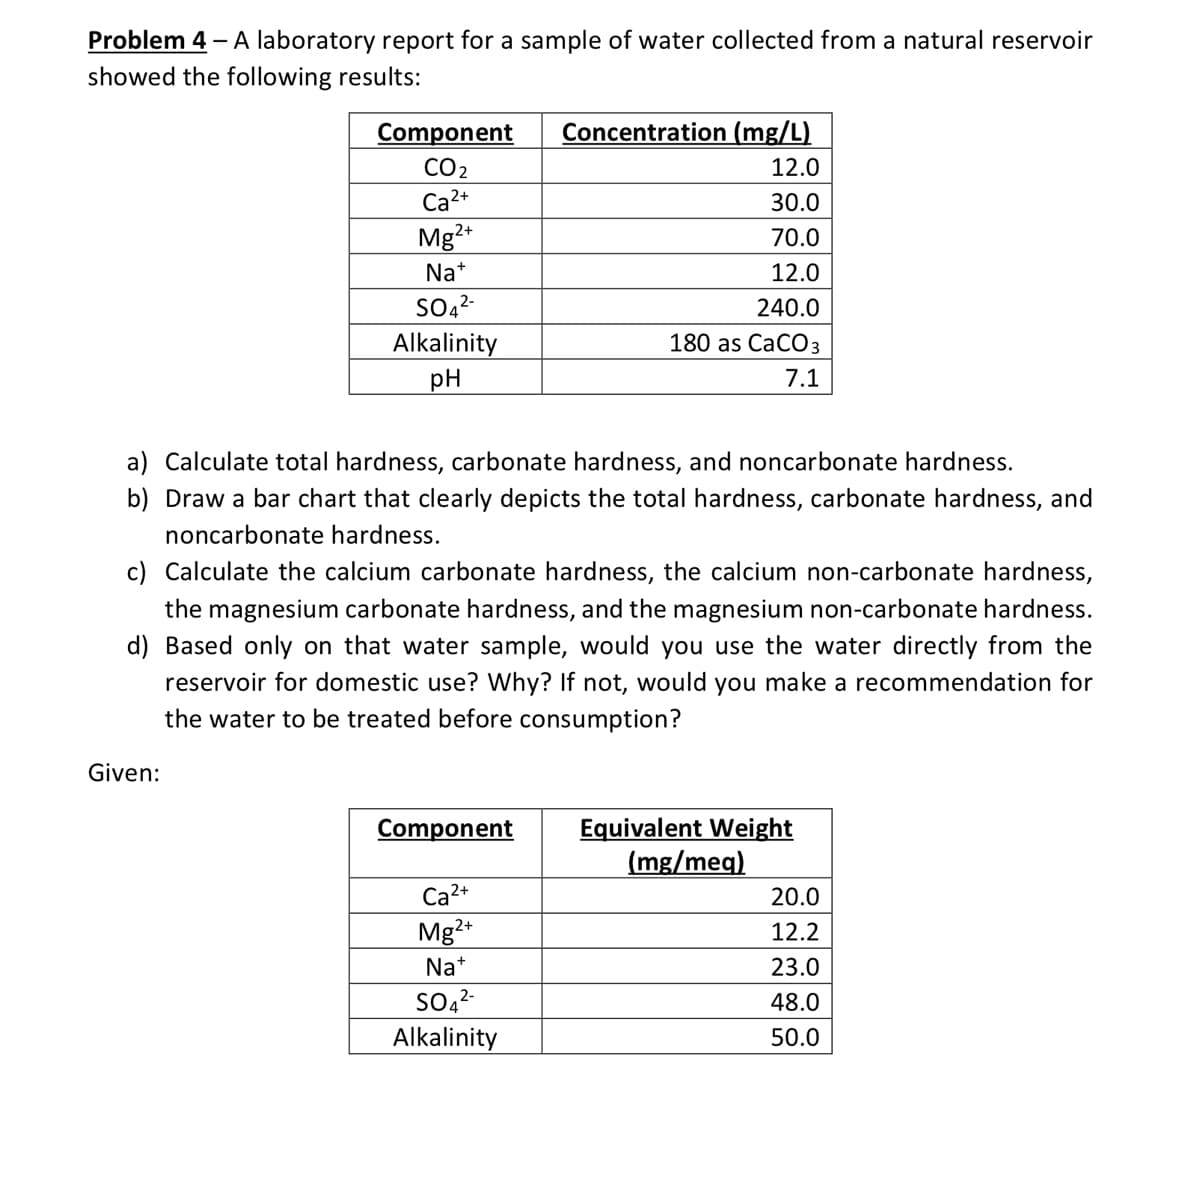 Problem 4 – A laboratory report for a sample of water collected from a natural reservoir
showed the following results:
Concentration (mg/L)
Component
CO2
Ca2+
12.0
30.0
Mg2+
70.0
Na*
12.0
SO2-
240.0
Alkalinity
pH
180 as CaCO3
7.1
a) Calculate total hardness, carbonate hardness, and noncarbonate hardness.
b) Draw a bar chart that clearly depicts the total hardness, carbonate hardness, and
noncarbonate hardness.
c) Calculate the calcium carbonate hardness, the calcium non-carbonate hardness,
the magnesium carbonate hardness, and the magnesium non-carbonate hardness.
d) Based only on that water sample, would you use the water directly from the
reservoir for domestic use? Why? If not, would you make a recommendation for
the water to be treated before consumption?
Given:
Equivalent Weight
(mg/meg)
Component
Ca2+
20.0
Mg2+
12.2
Na*
23.0
SO42-
48.0
Alkalinity
50.0
